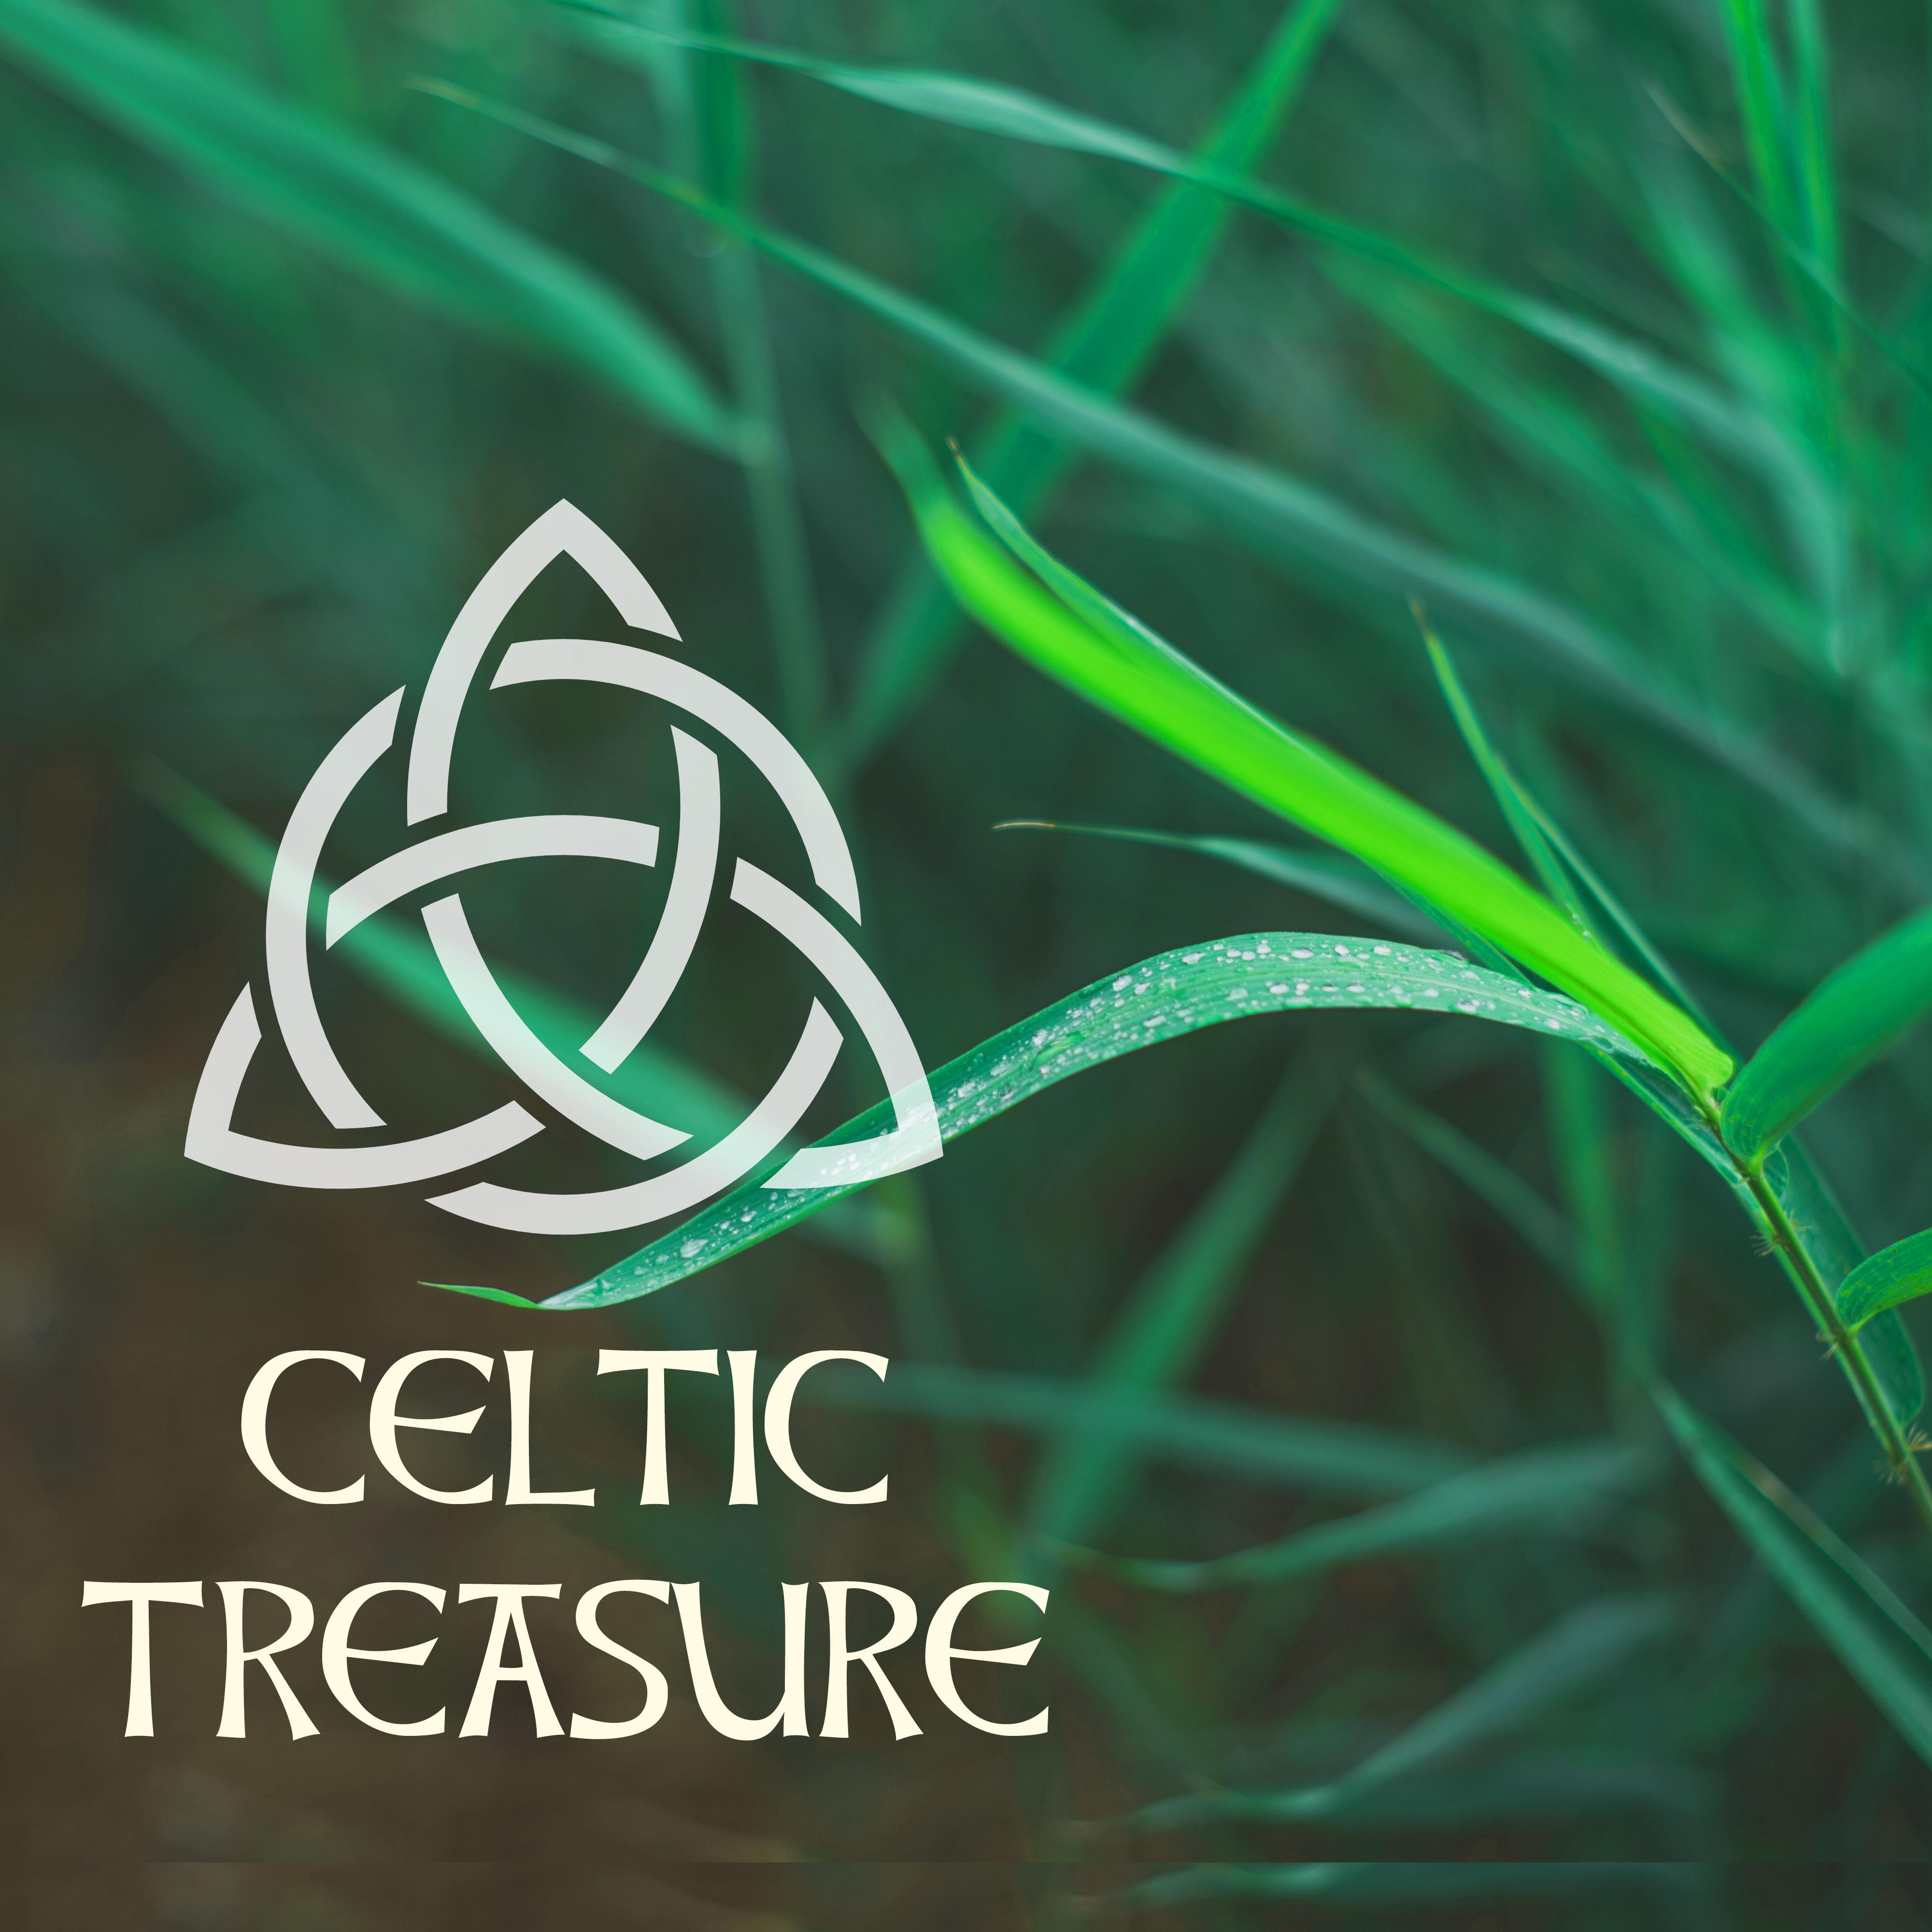 Celtic Treasure - Music of Ireland, Celtic Harp Soundscapes, Relaxing Songs Pure Background